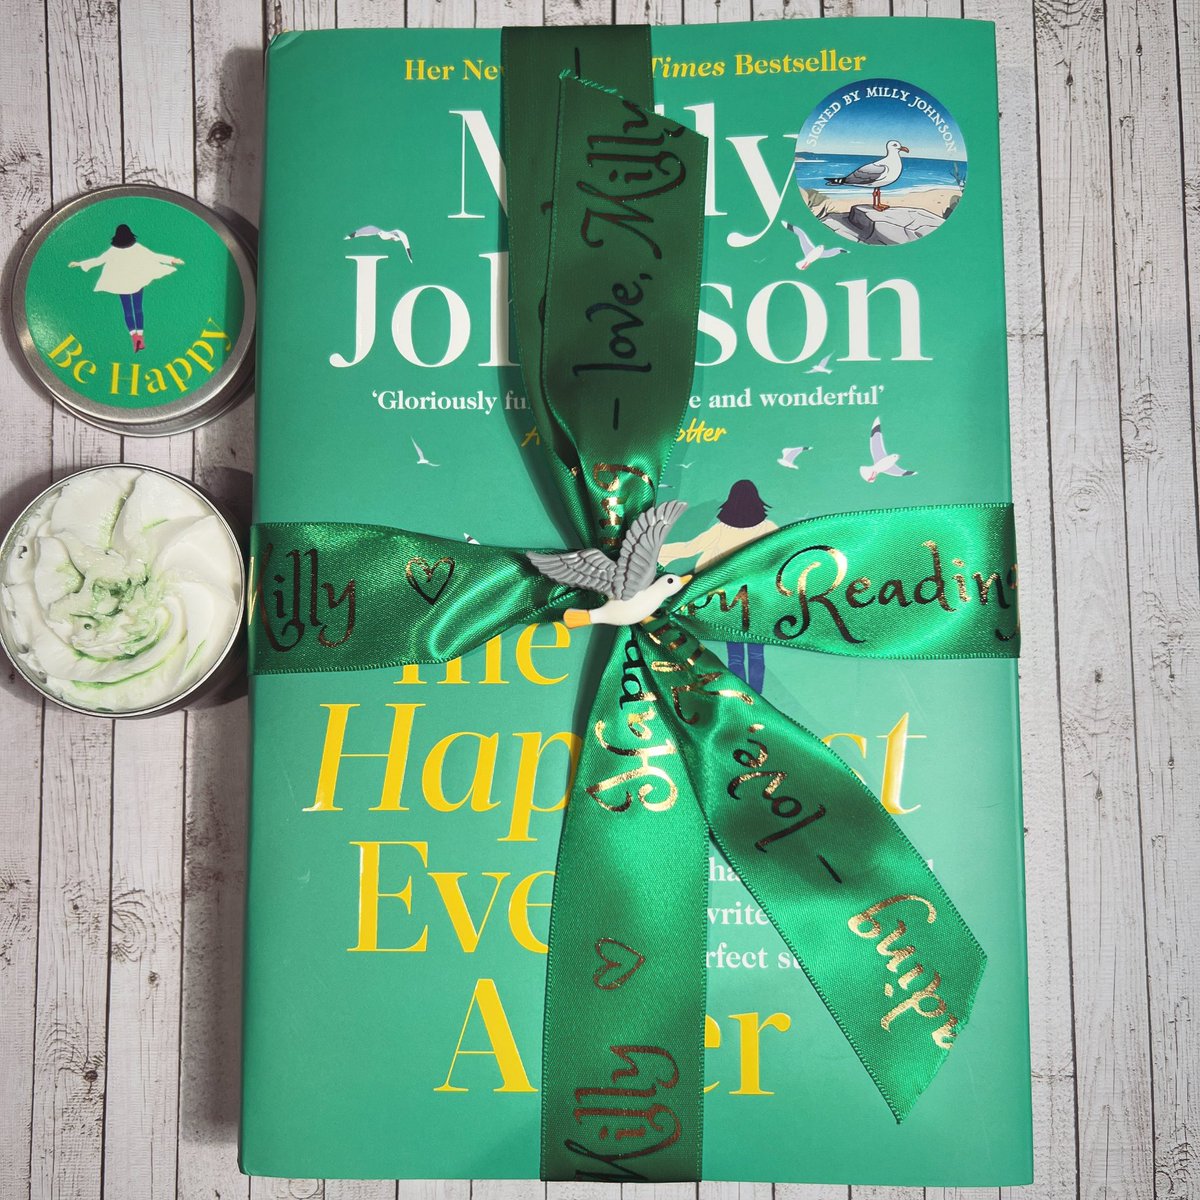 Happy #WorldBookDay - yeah it’s for kids, but us adults need a world book day too. Comes with @OleeCosmetics mint vanilla treat. If you want to read about ‘The Happiest Ever After’ millyjohnson.co.uk/the-happiest-e… Follow me, like, RT & I’ll do a draw in the morning to win it! (UK only)